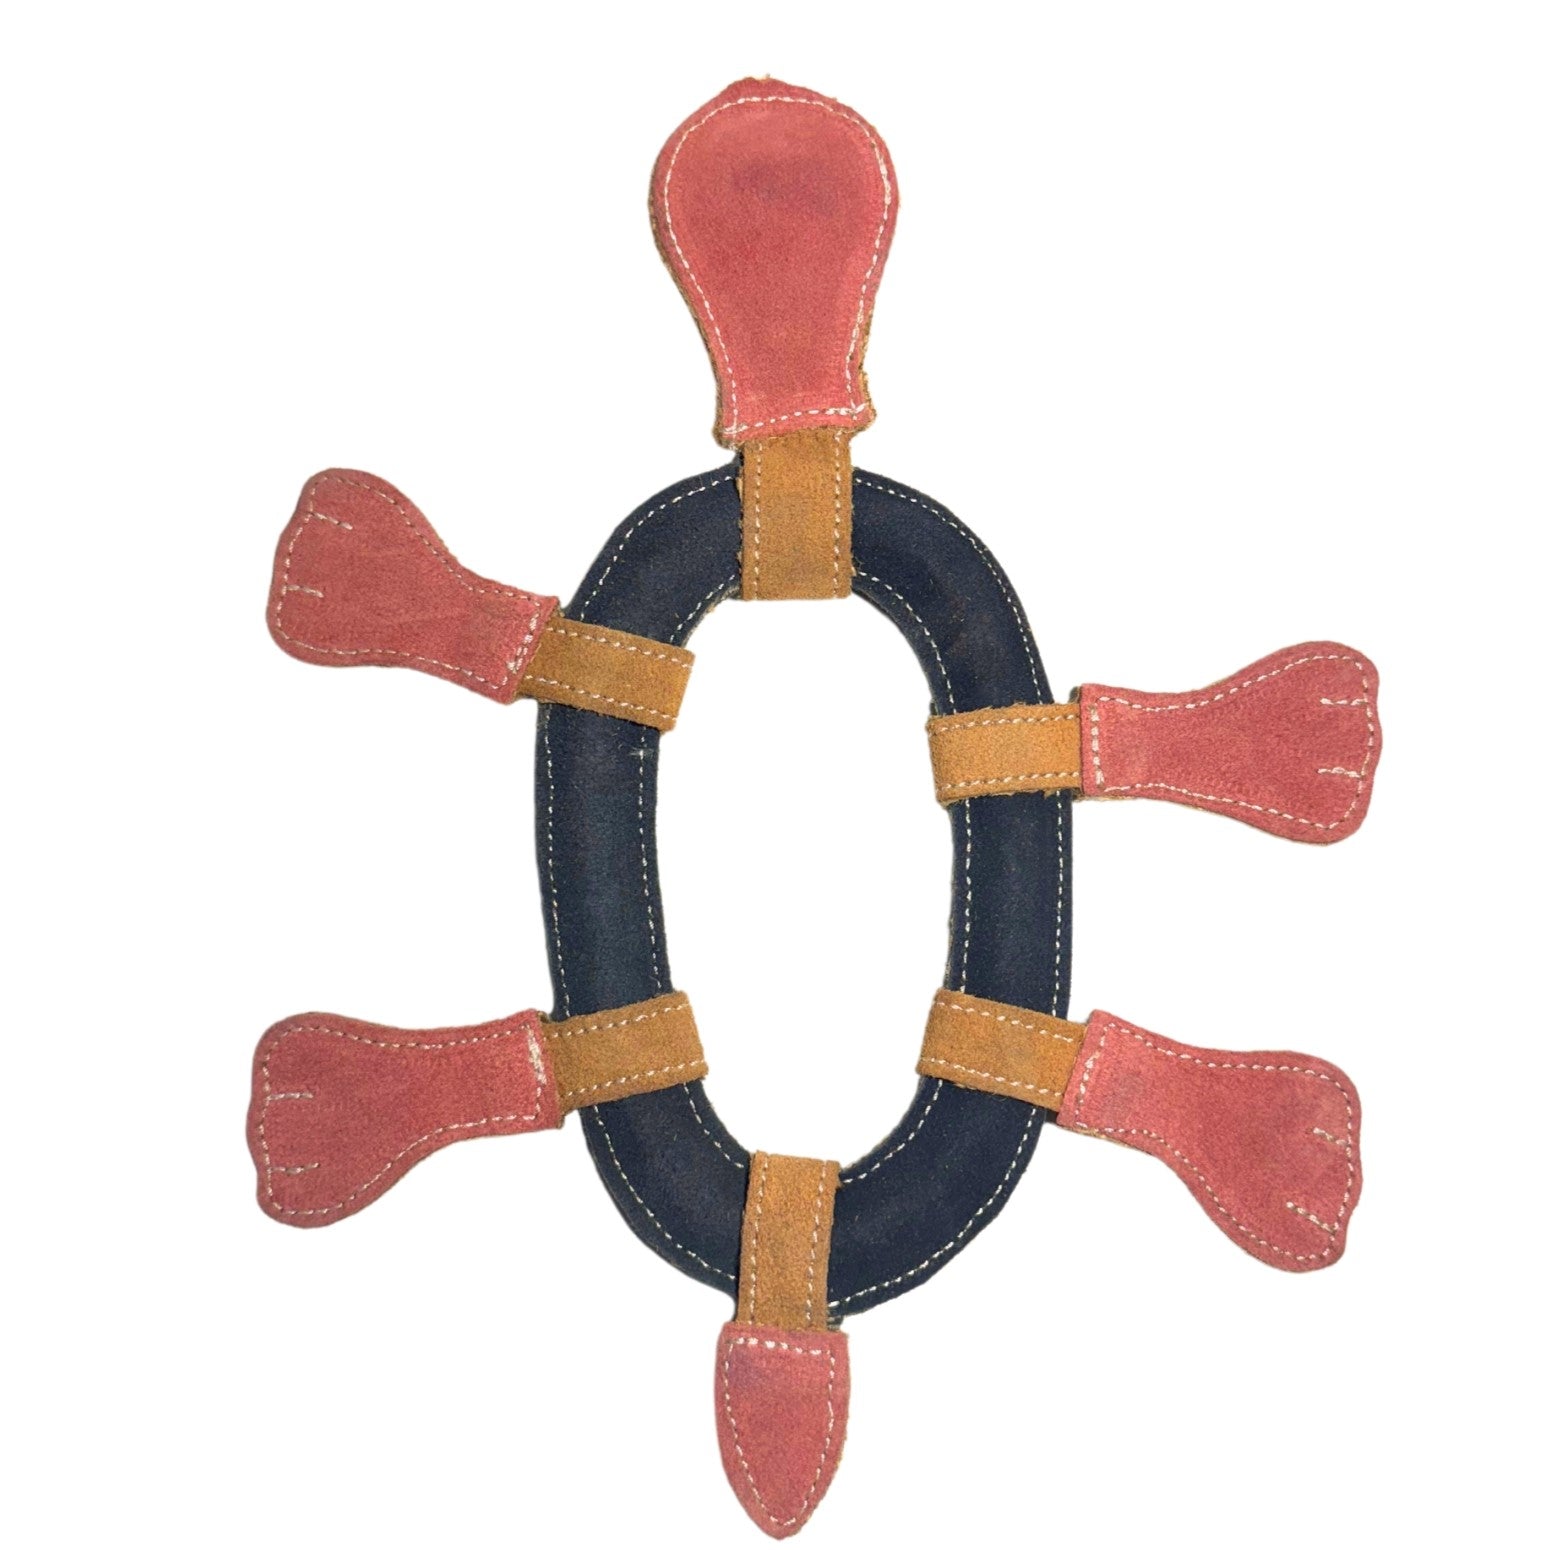 A handmade Thomas the Turtle - natural & pink dog chew toy designed to resemble a ship's wheel, featuring a dark blue ring with tan stitching and four red paddle-shaped extensions with beige accents, by Georgie Paws.